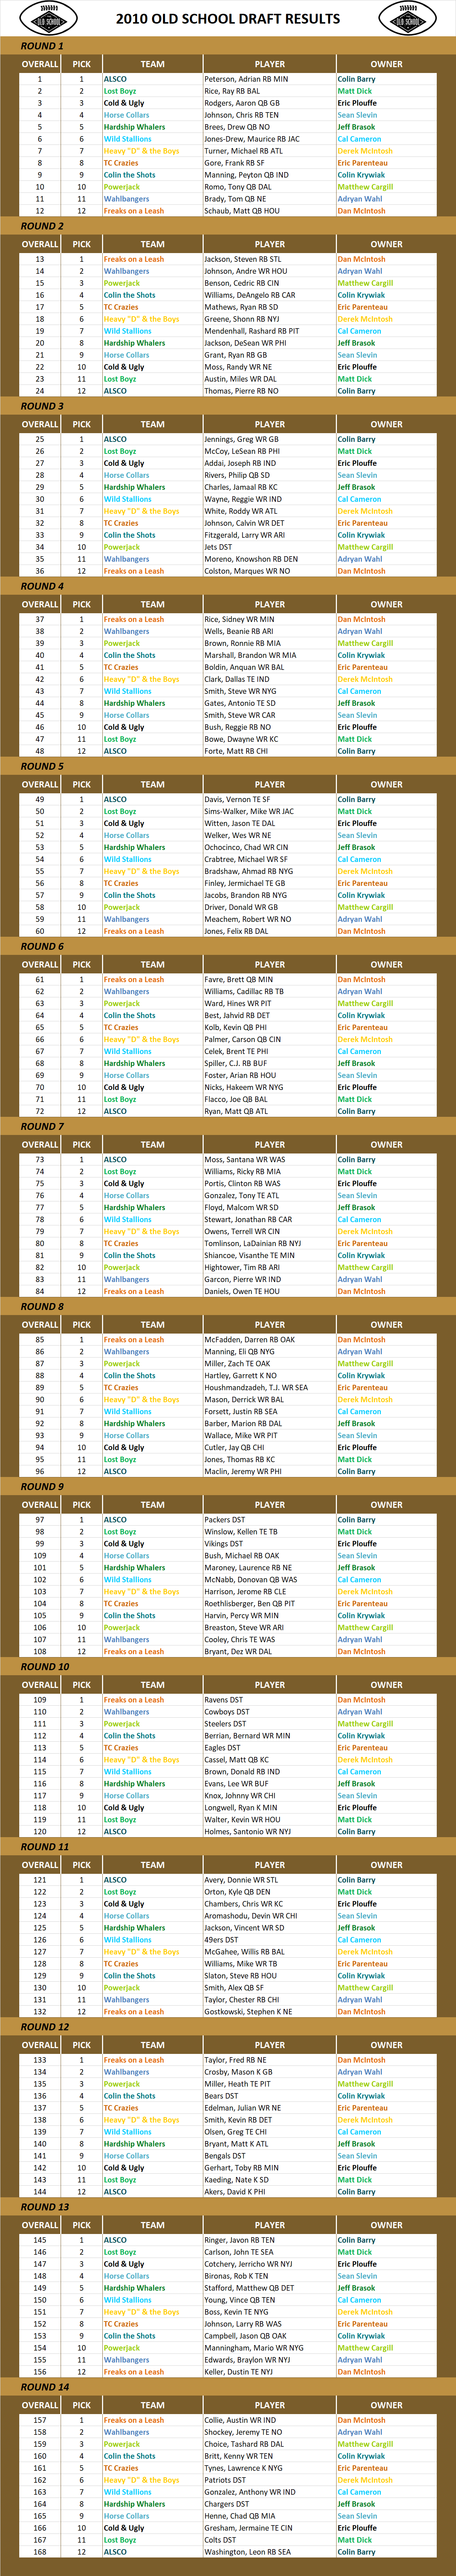 2010 National Football League Pool Draft Results